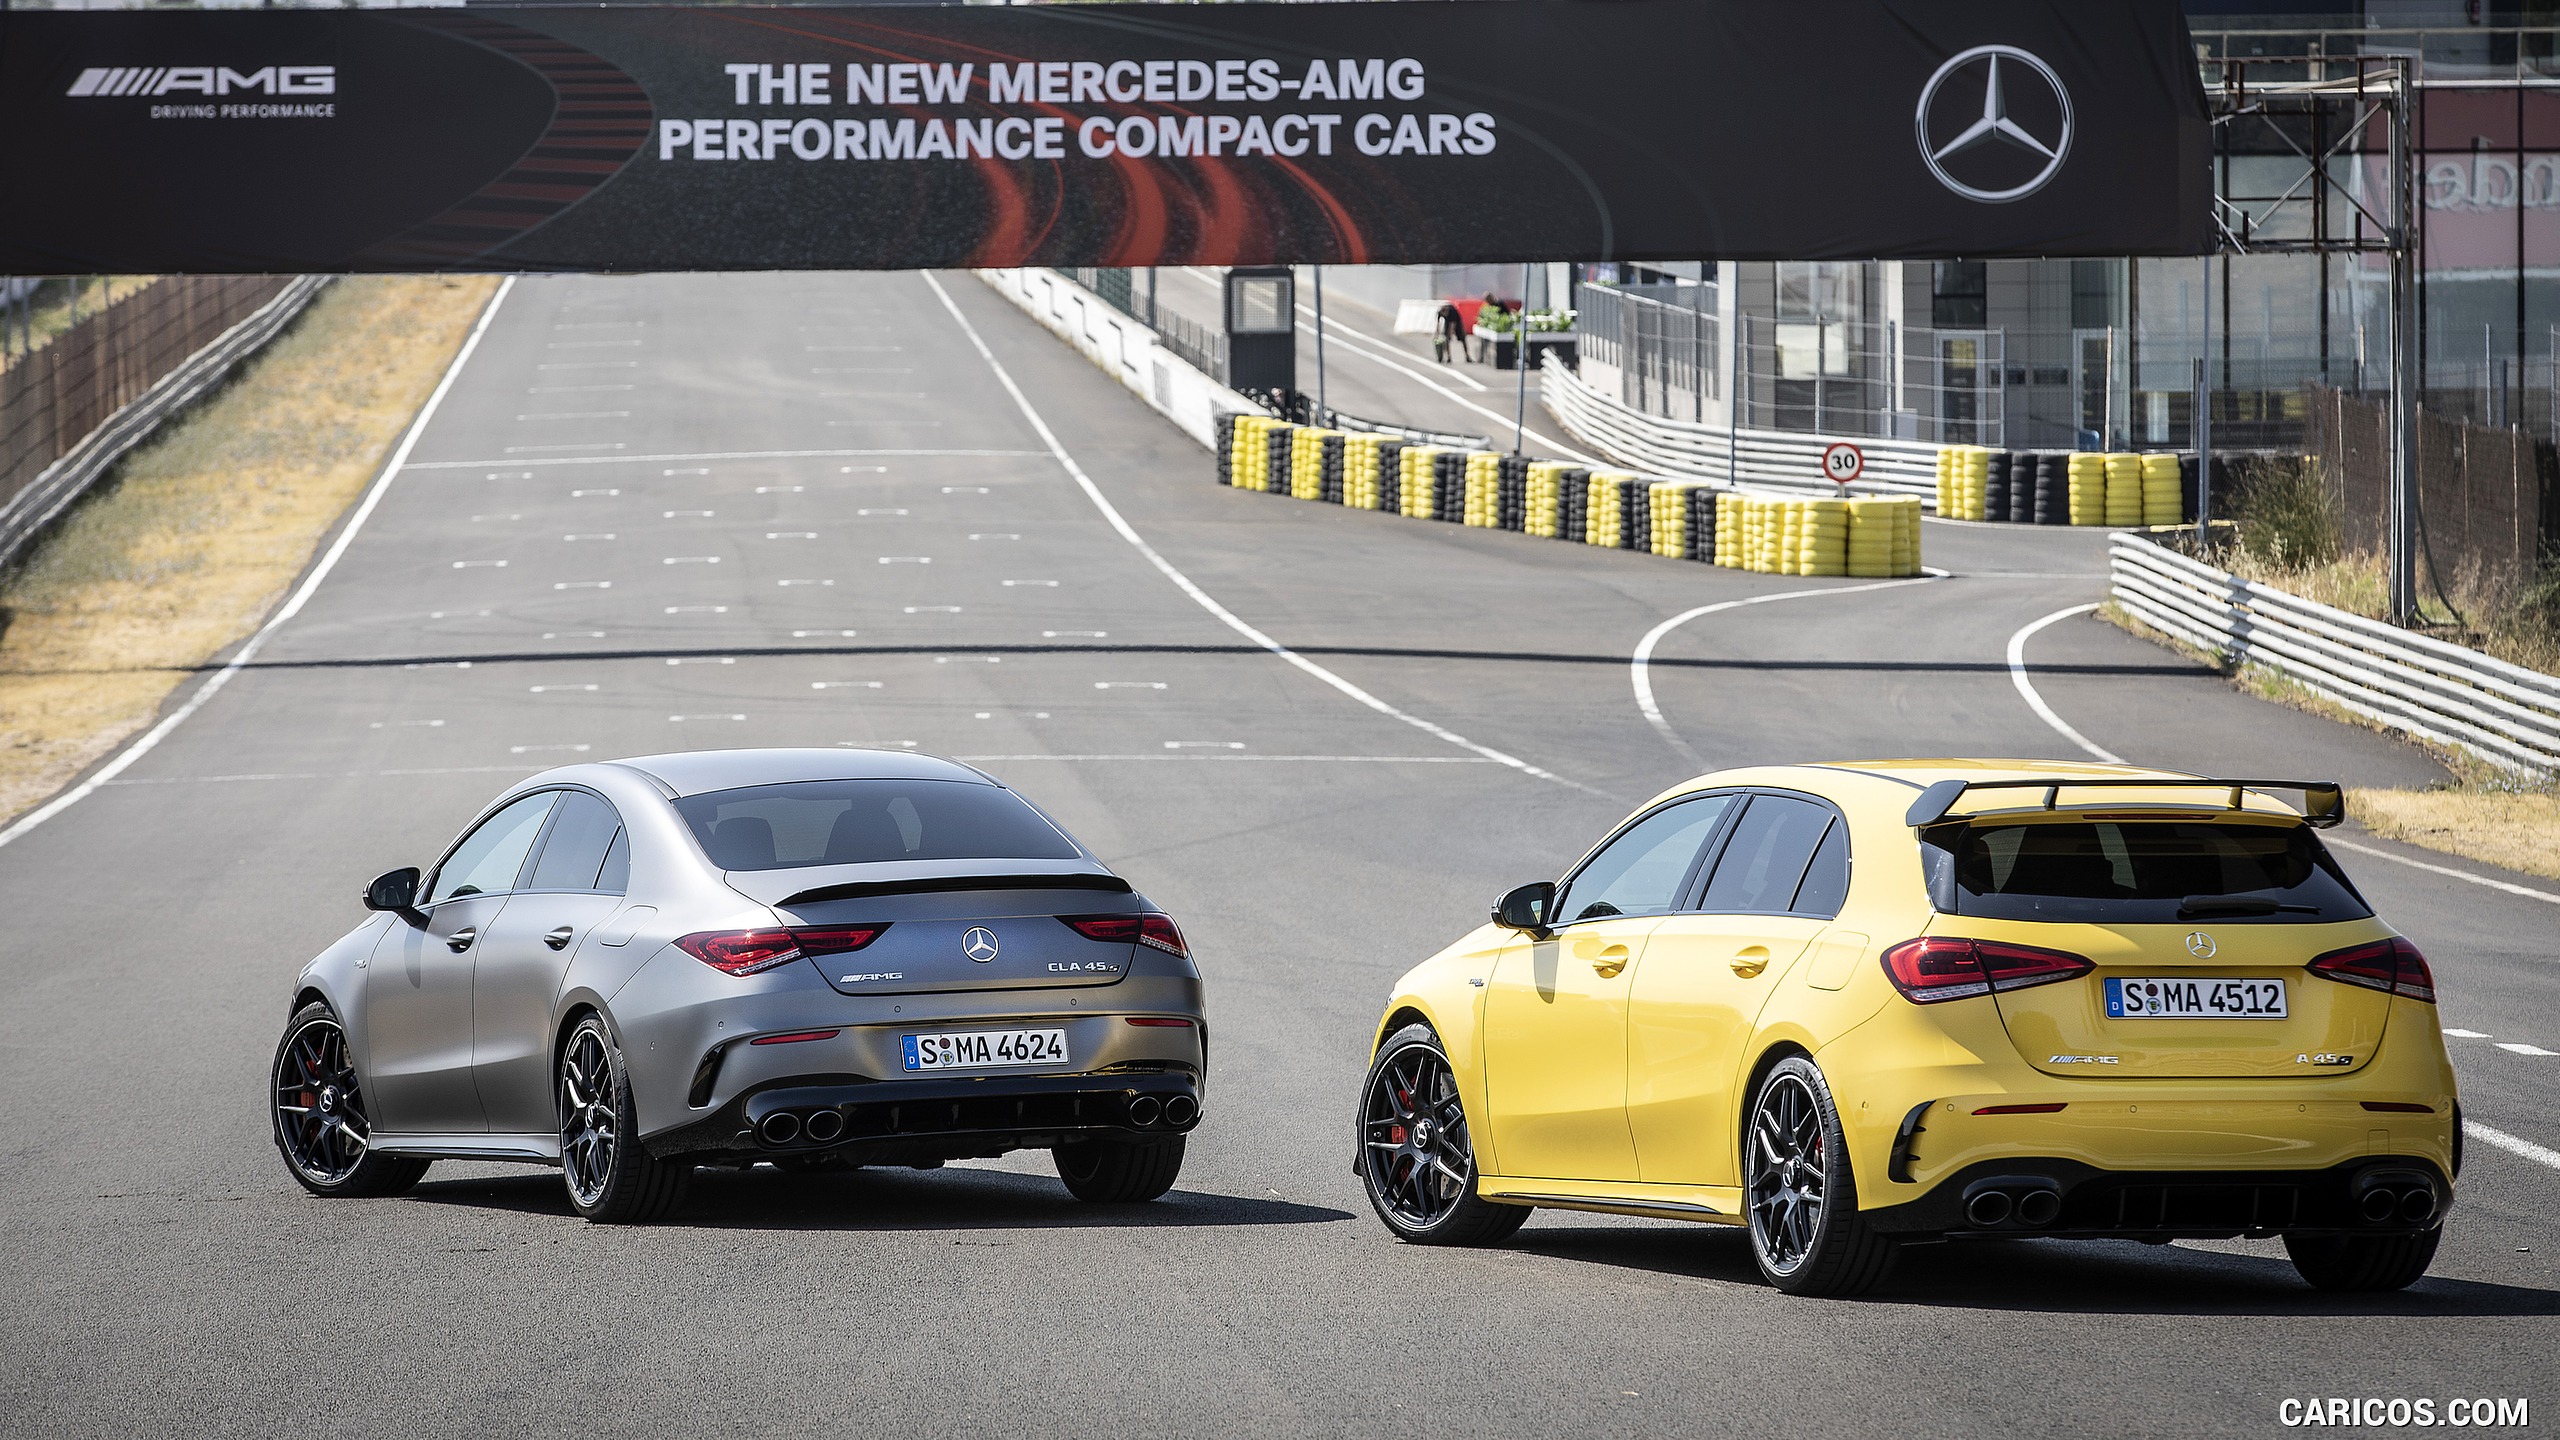 2020 Mercedes-AMG A 45 S 4MATIC+ and CLA 45 AMG, #91 of 188